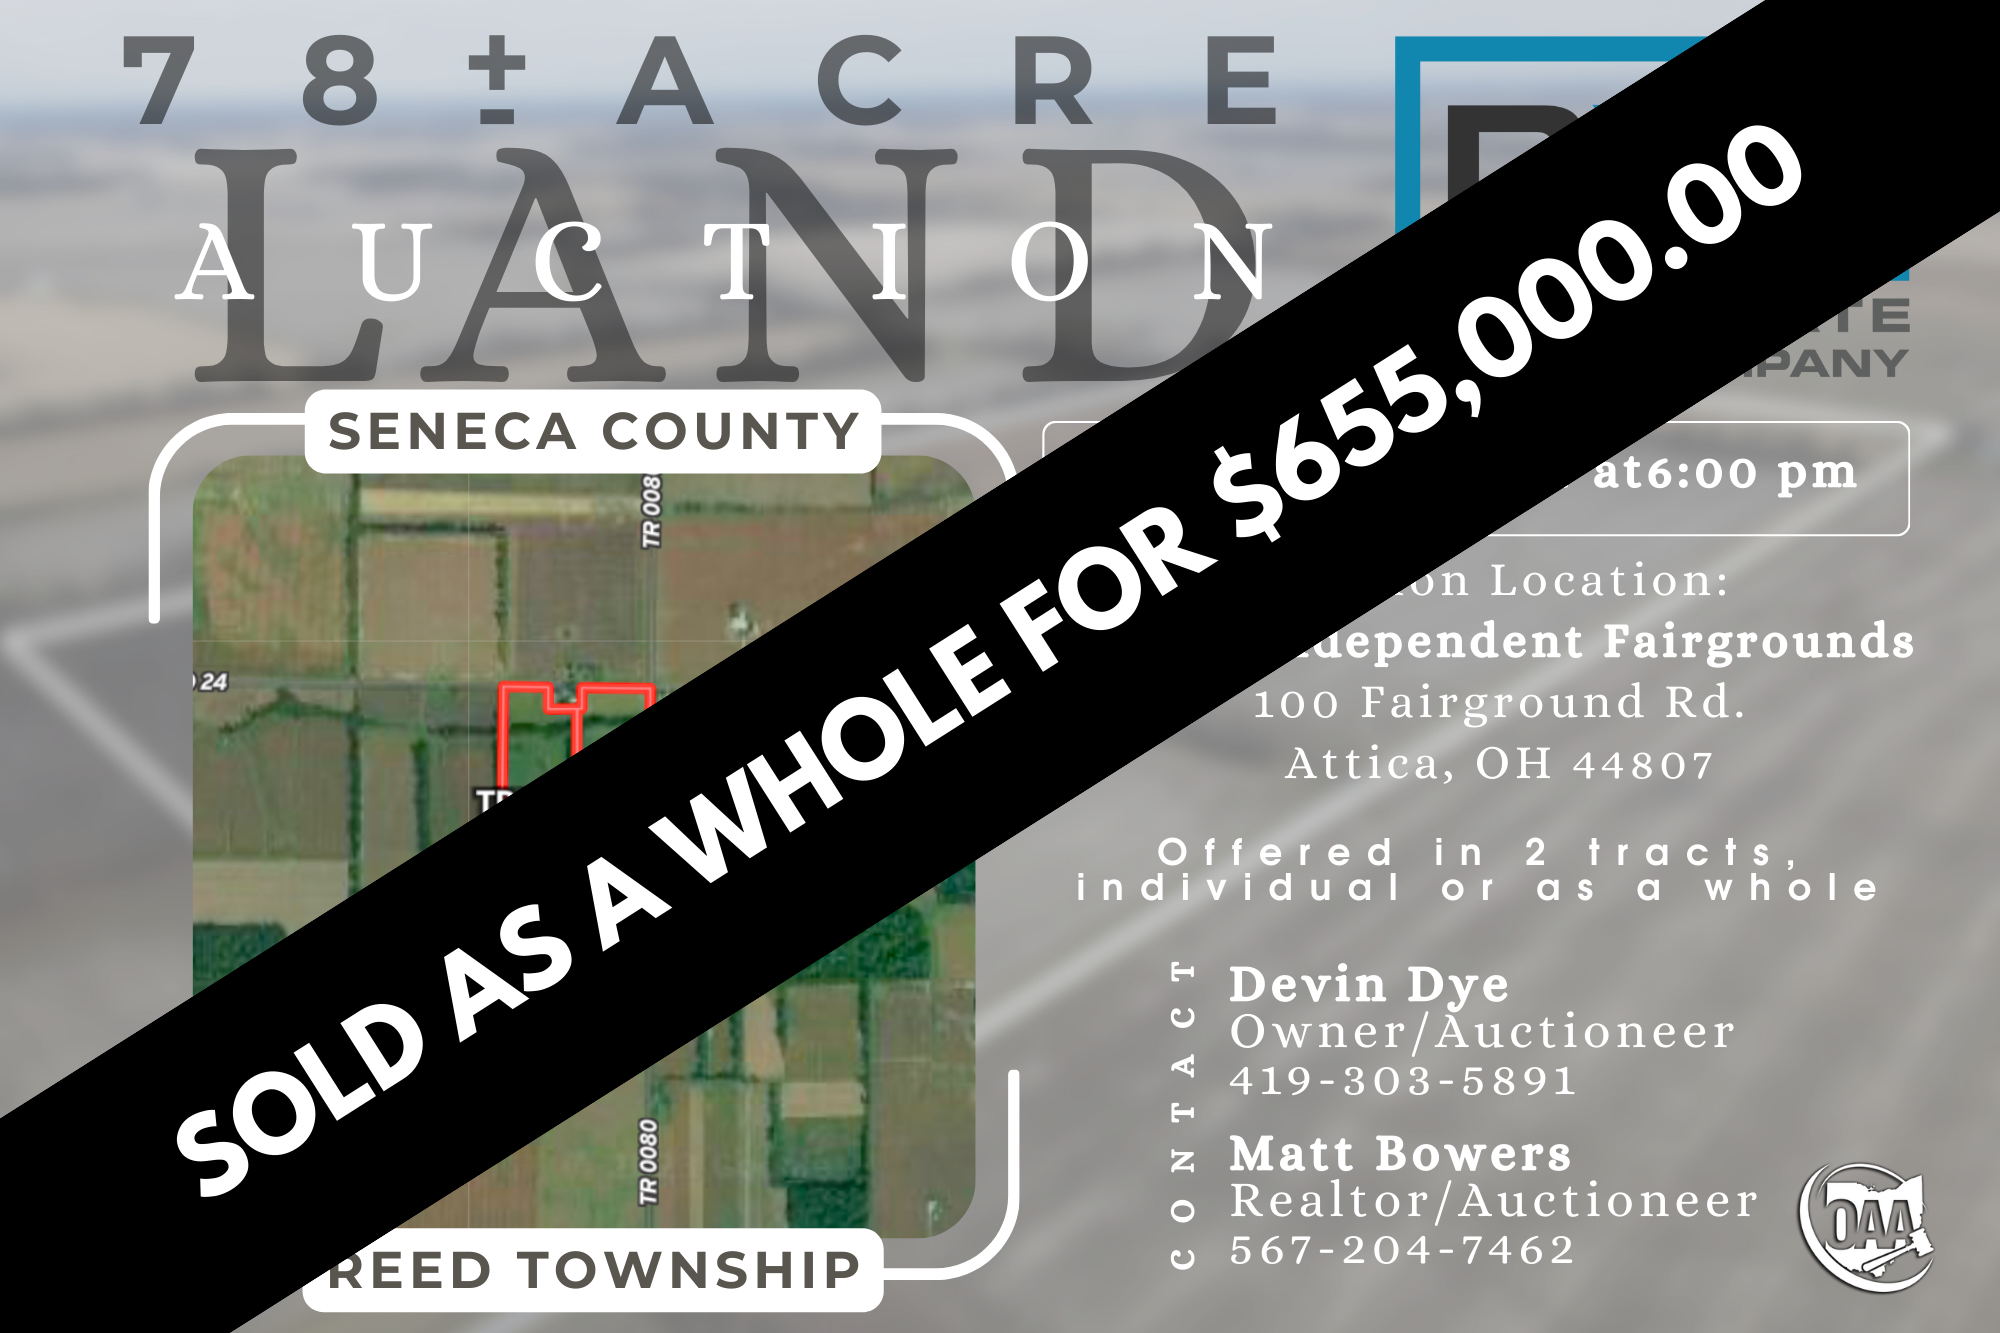 Auction: 78 +/- Acres, Seneca County, Reed Township